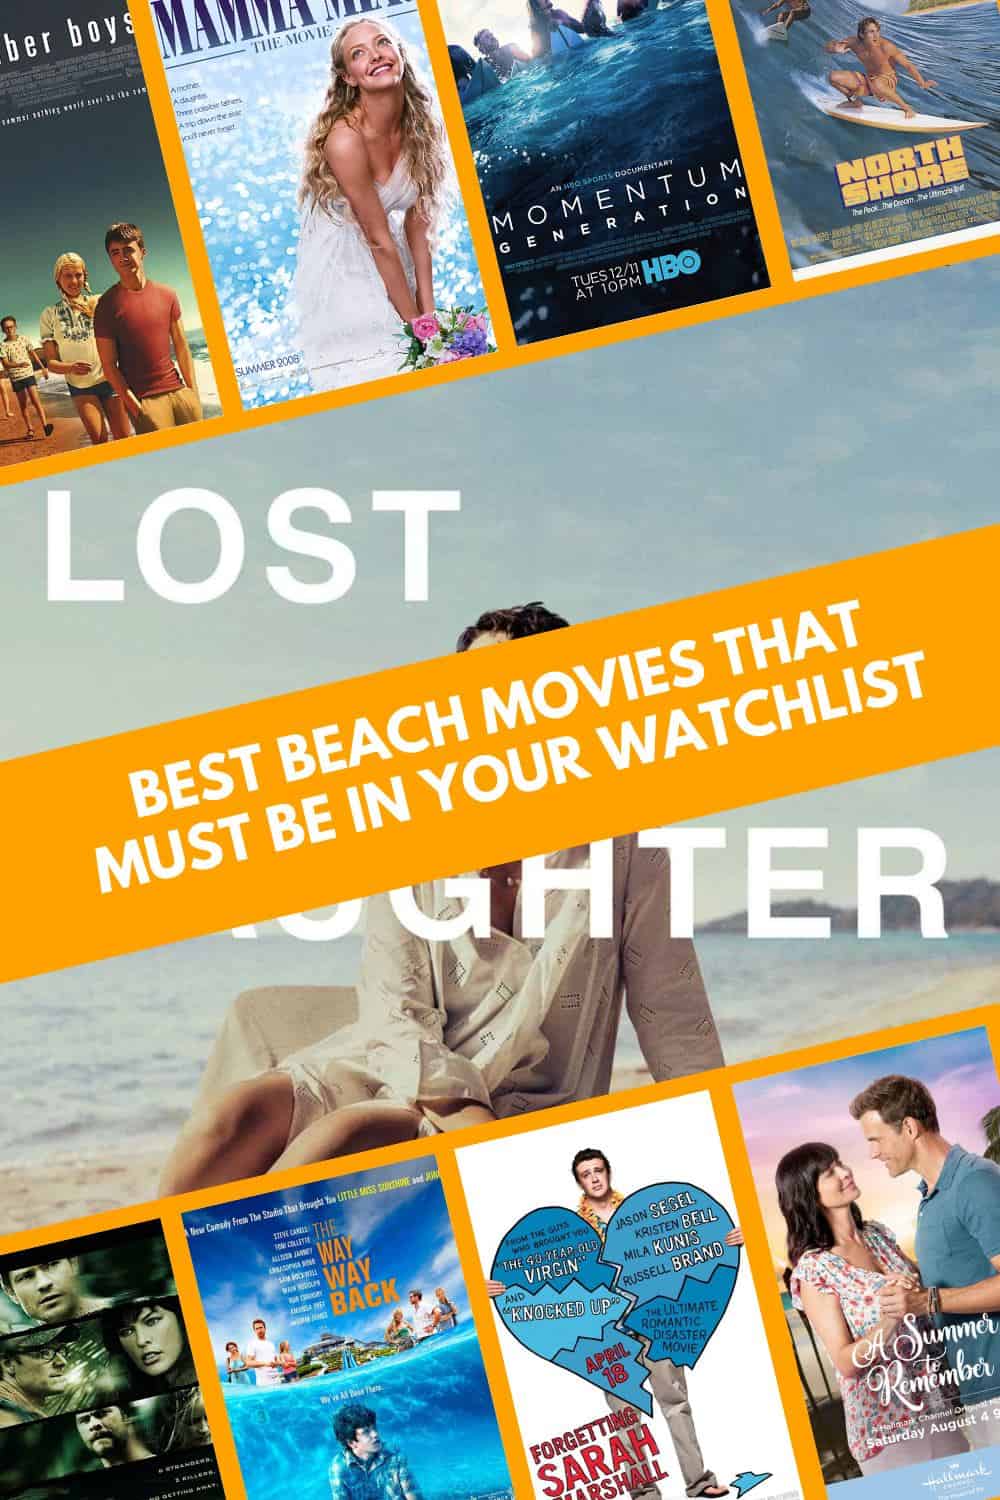 Beach Movies That Must Be In Your Watchlist